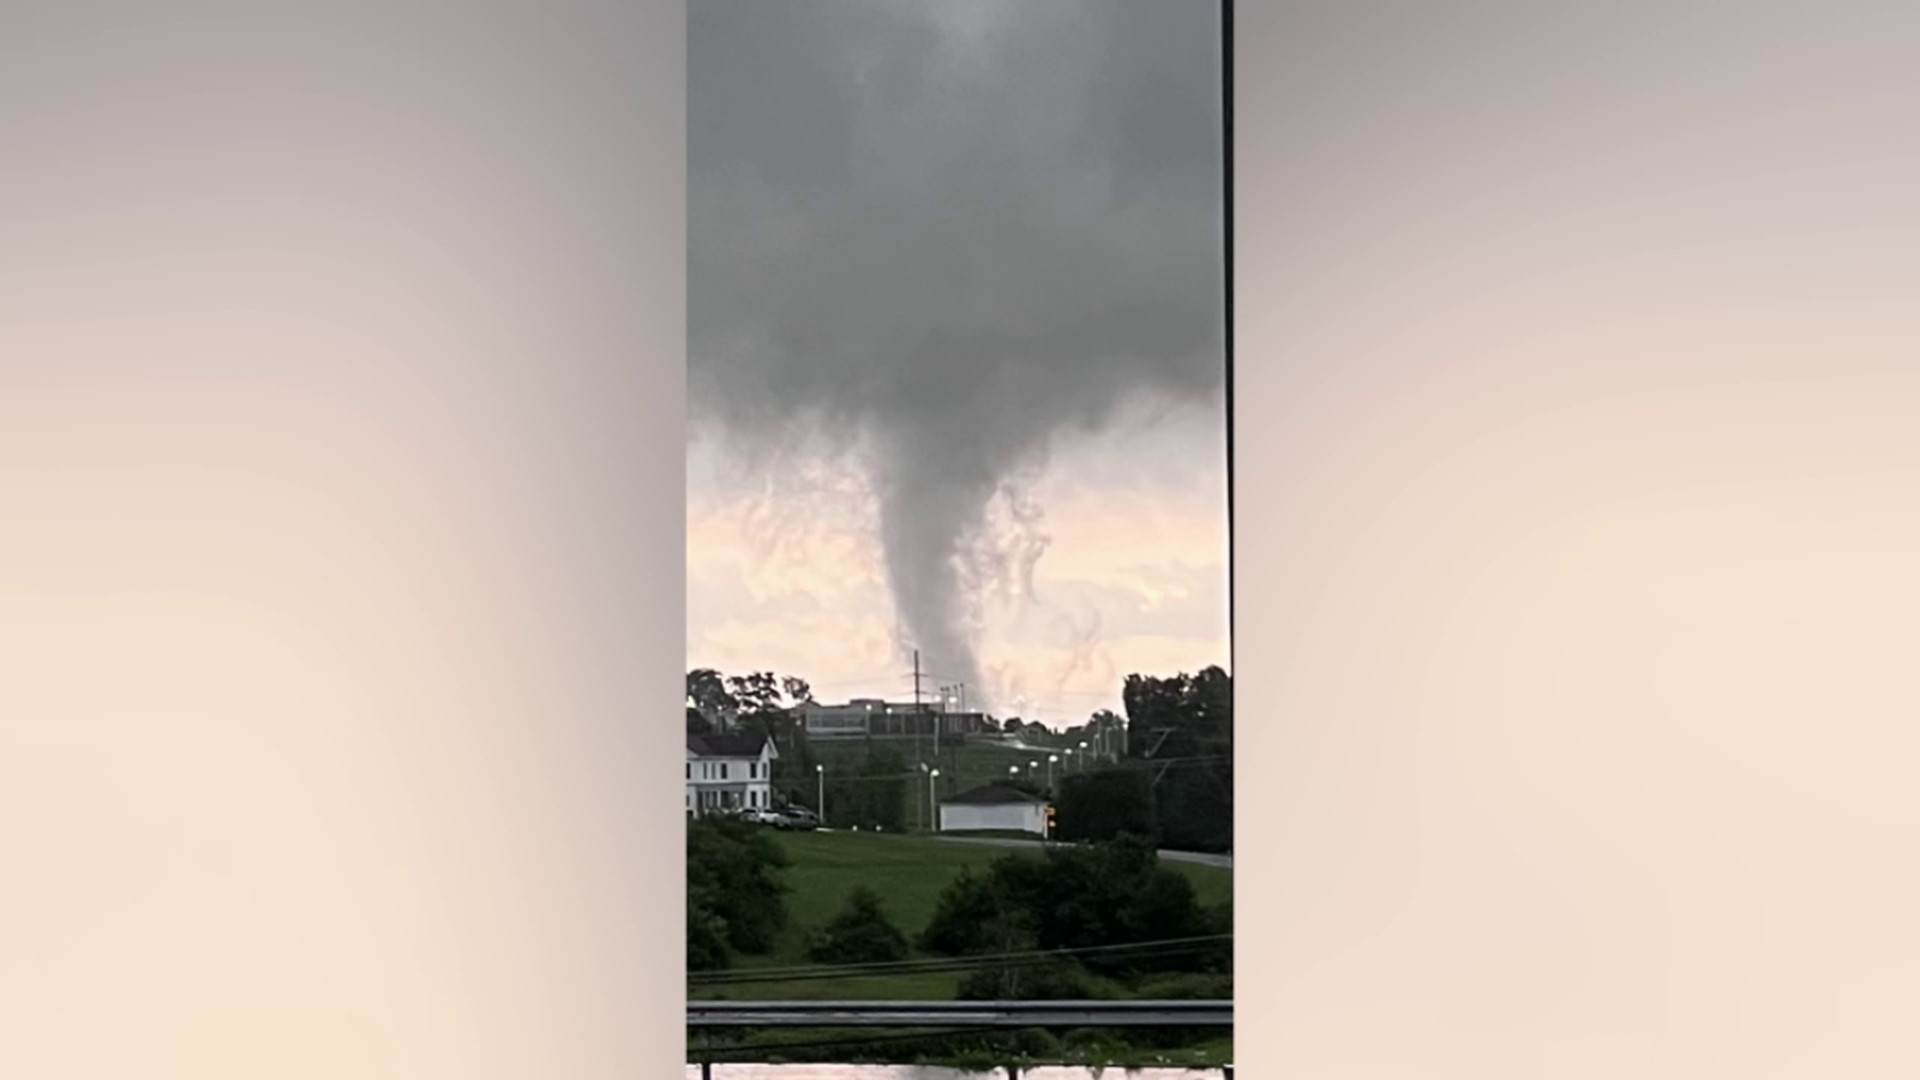 Scud clouds mistakenly shared as funnel clouds on social media cause a scare. Here's how you can tell the difference.